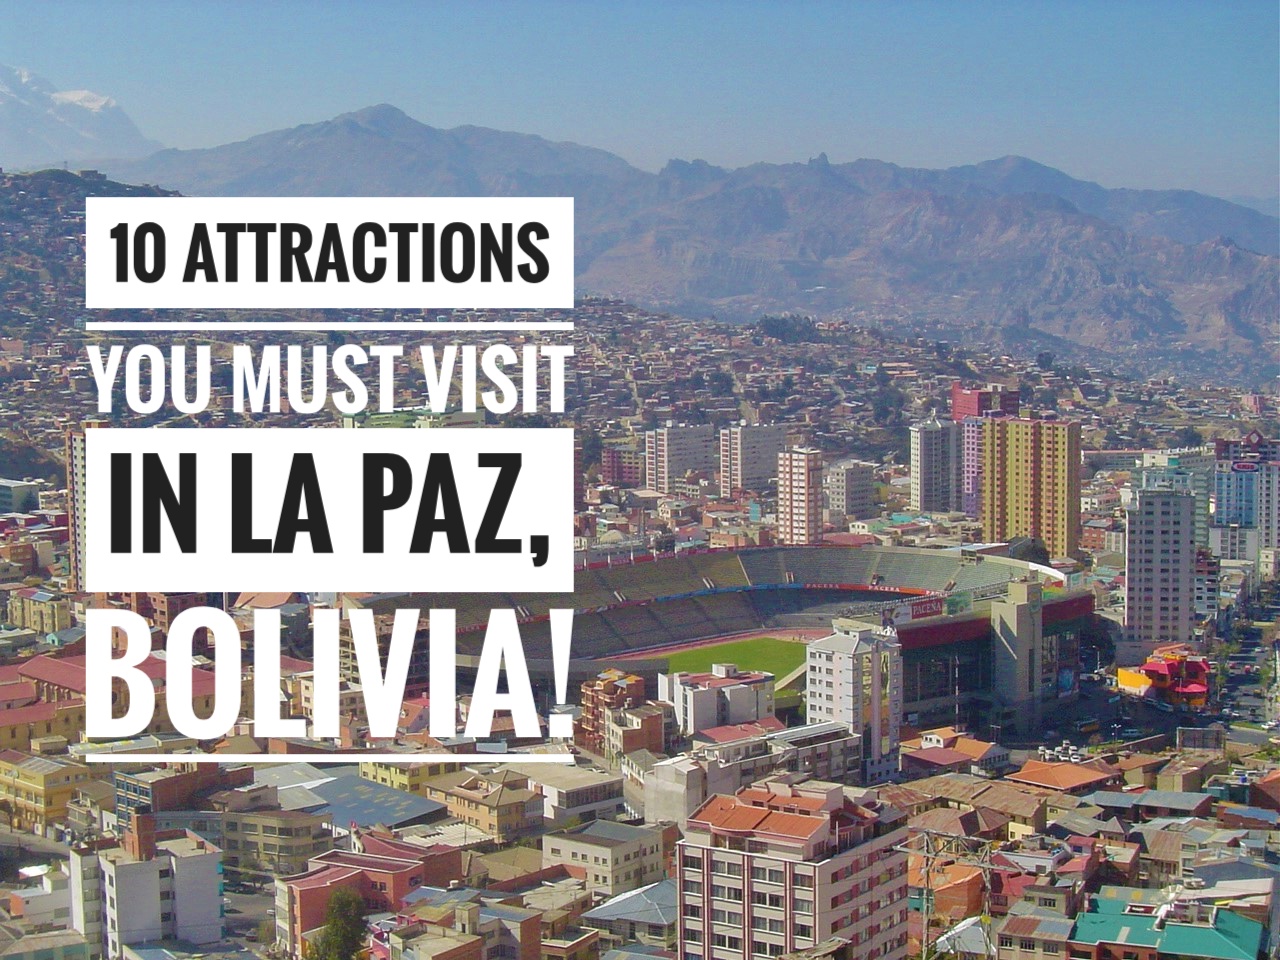 La Paz is the highest capital city in the world, located 11,975 feet above sea level and is a city full of things to discover! Take a look at the 10 must visit attractions in La Paz. There are plenty of Treasures Of Traveling to see in this Bolivian city!